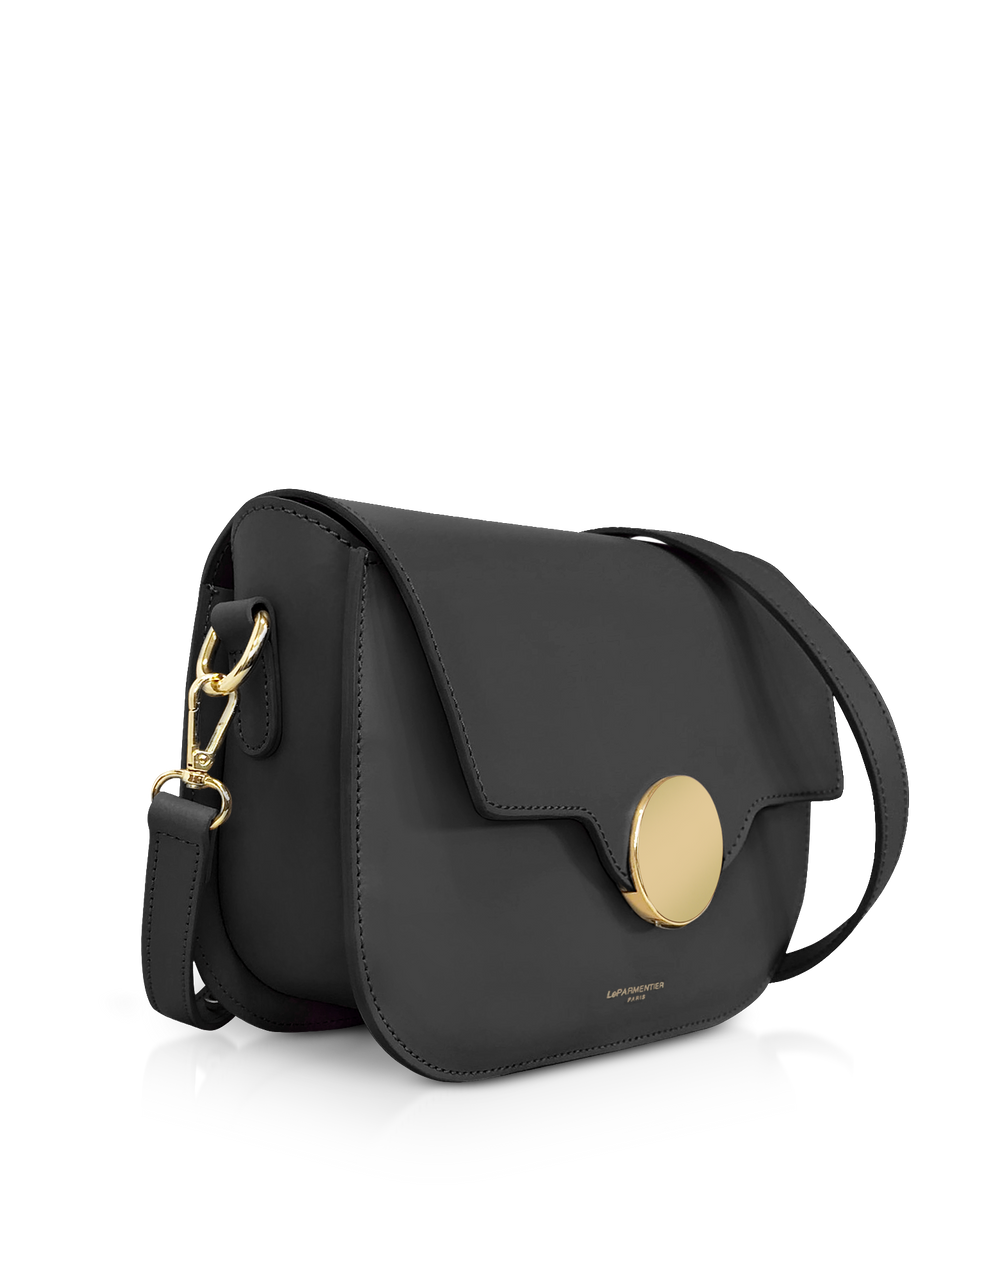 Stylish black leather crossbody bag with gold clasp and adjustable strap